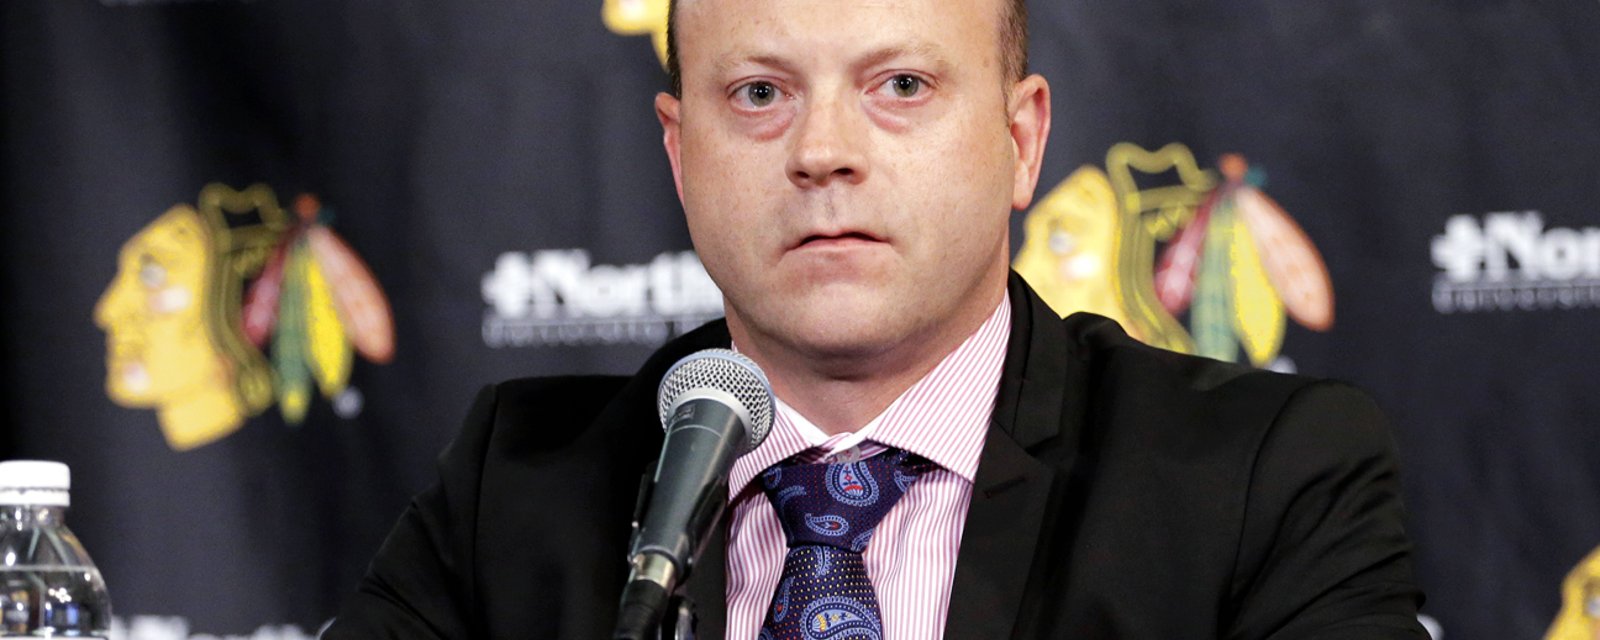 Hawks GM Bowman in serious hot water over sex scandal allegations 